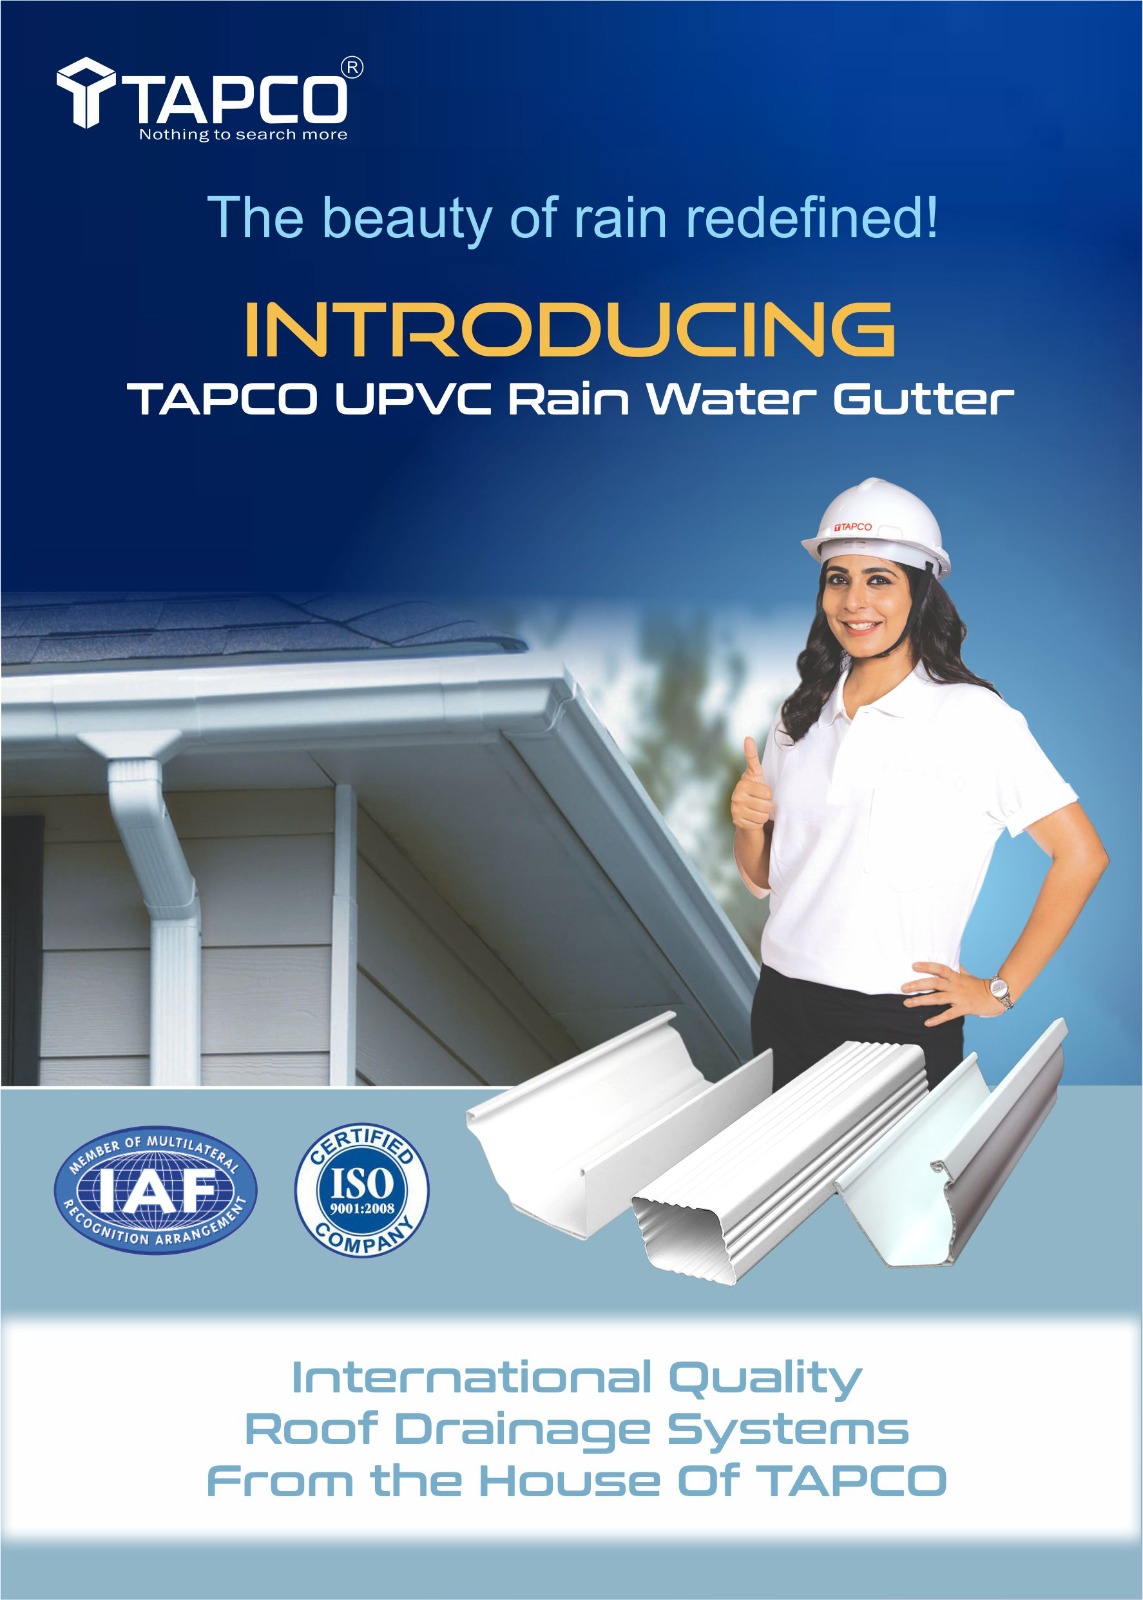 Why Rain Water Gutters are Important?